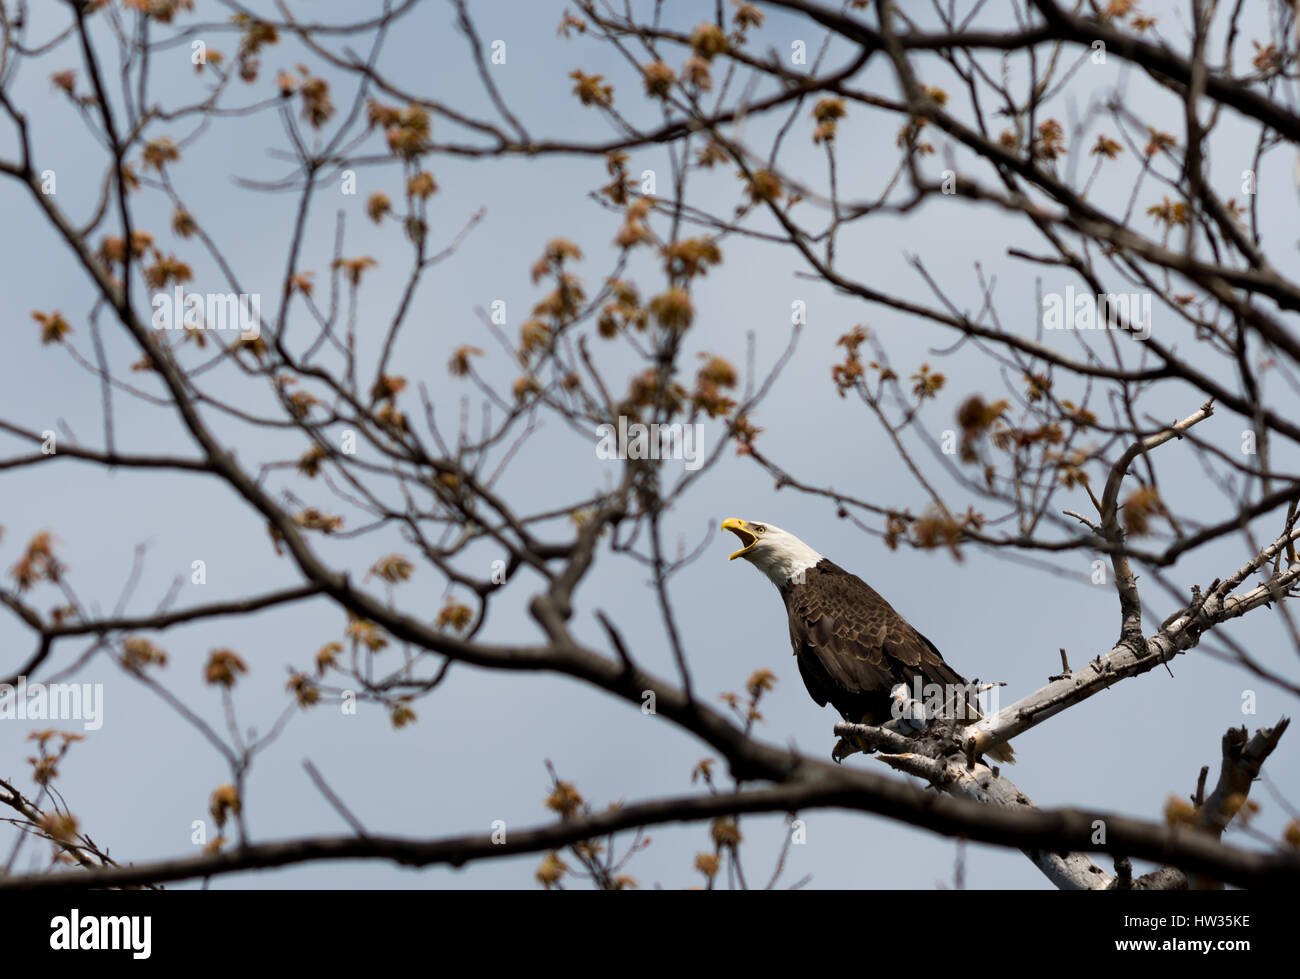 A bald eagle (Haliaeetus leucocephalus) calls from a tree in the spring. Stock Photo